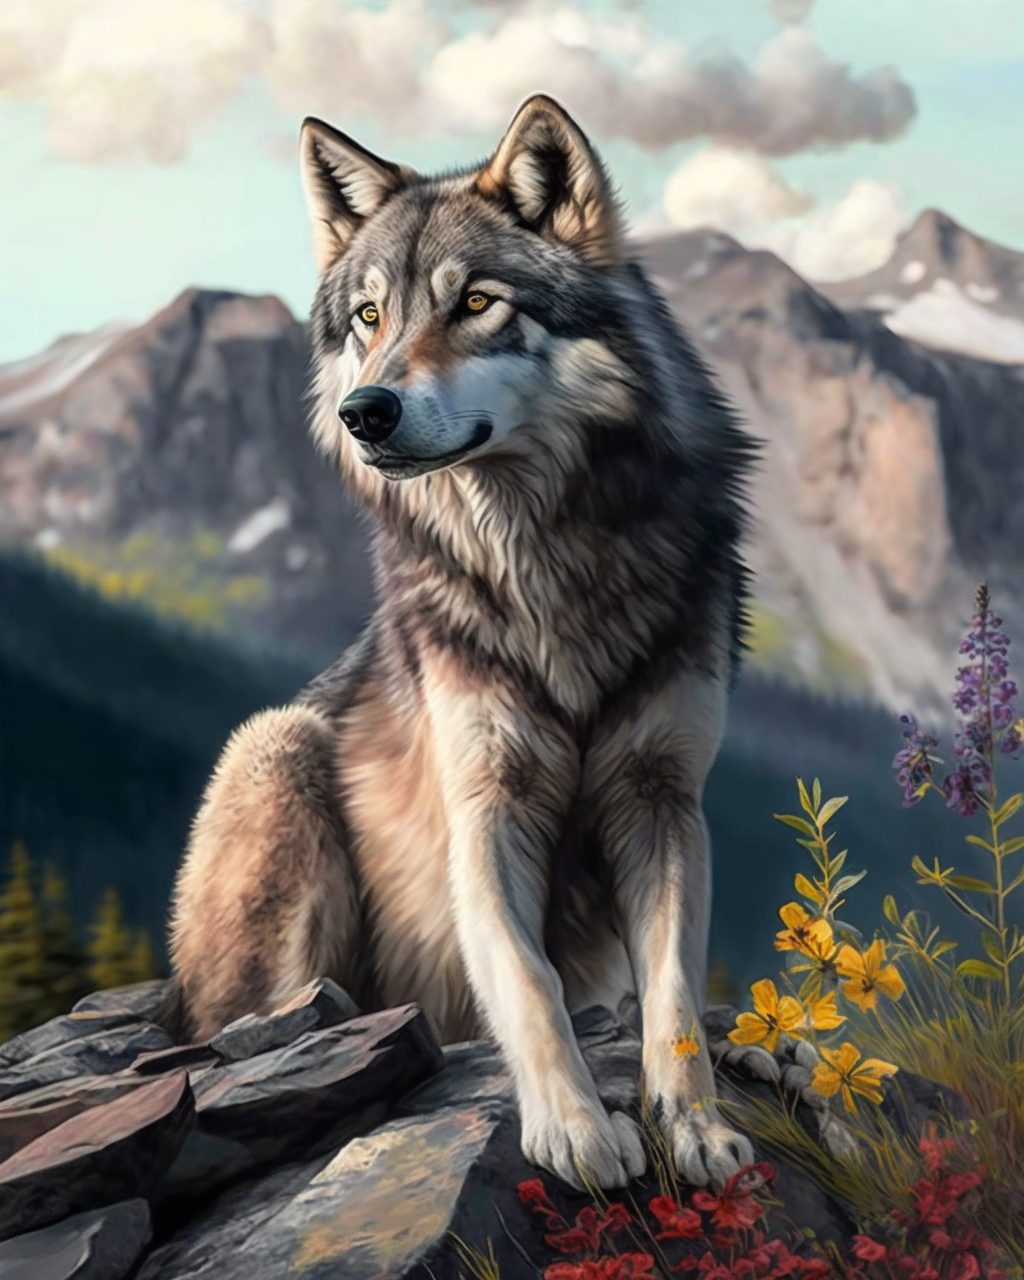 Waterfall And Wolf - 5D Diamond Painting 